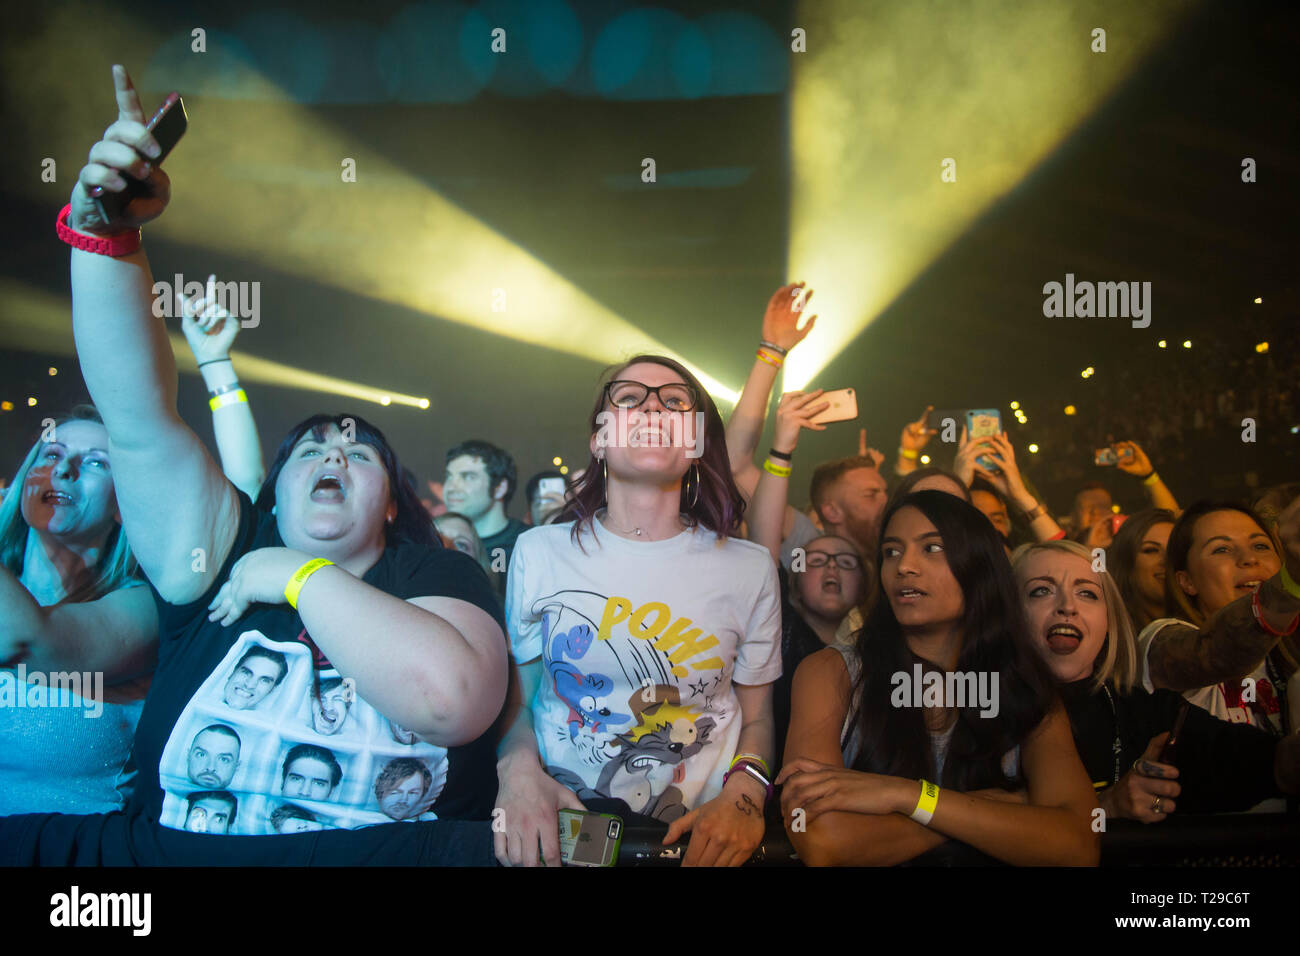 United Kingdom, Wembley Arena, 30th March 2018.  Busted fans to see their band perform live on stage during their 'Half Way There' tour at Wembley Arena.  Michael Tubi / Alamy Live News Stock Photo